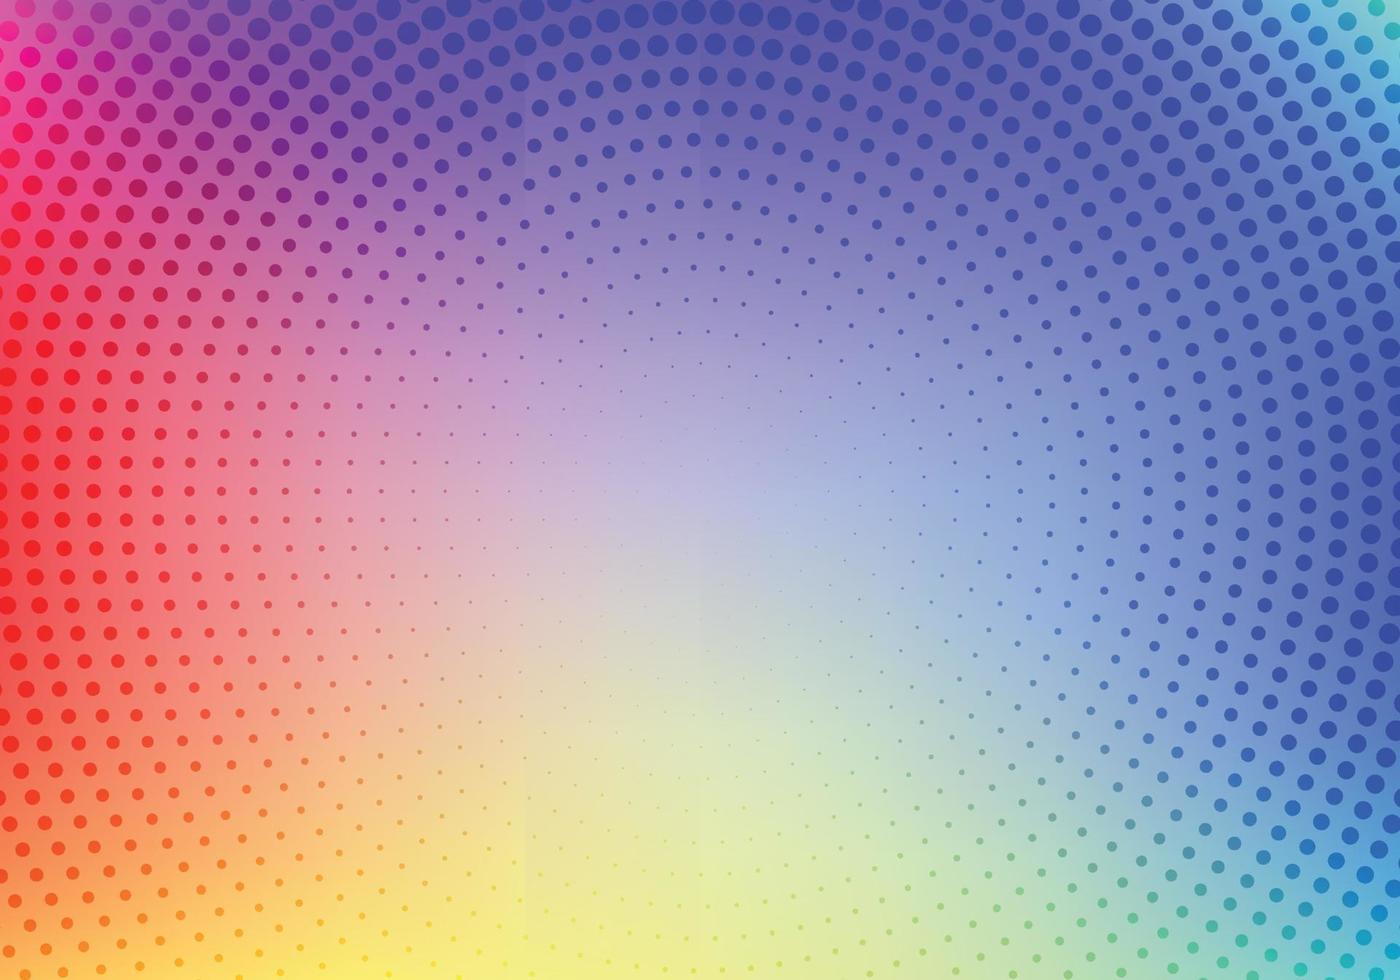 Abstract circular decorative dotted colorful background vector